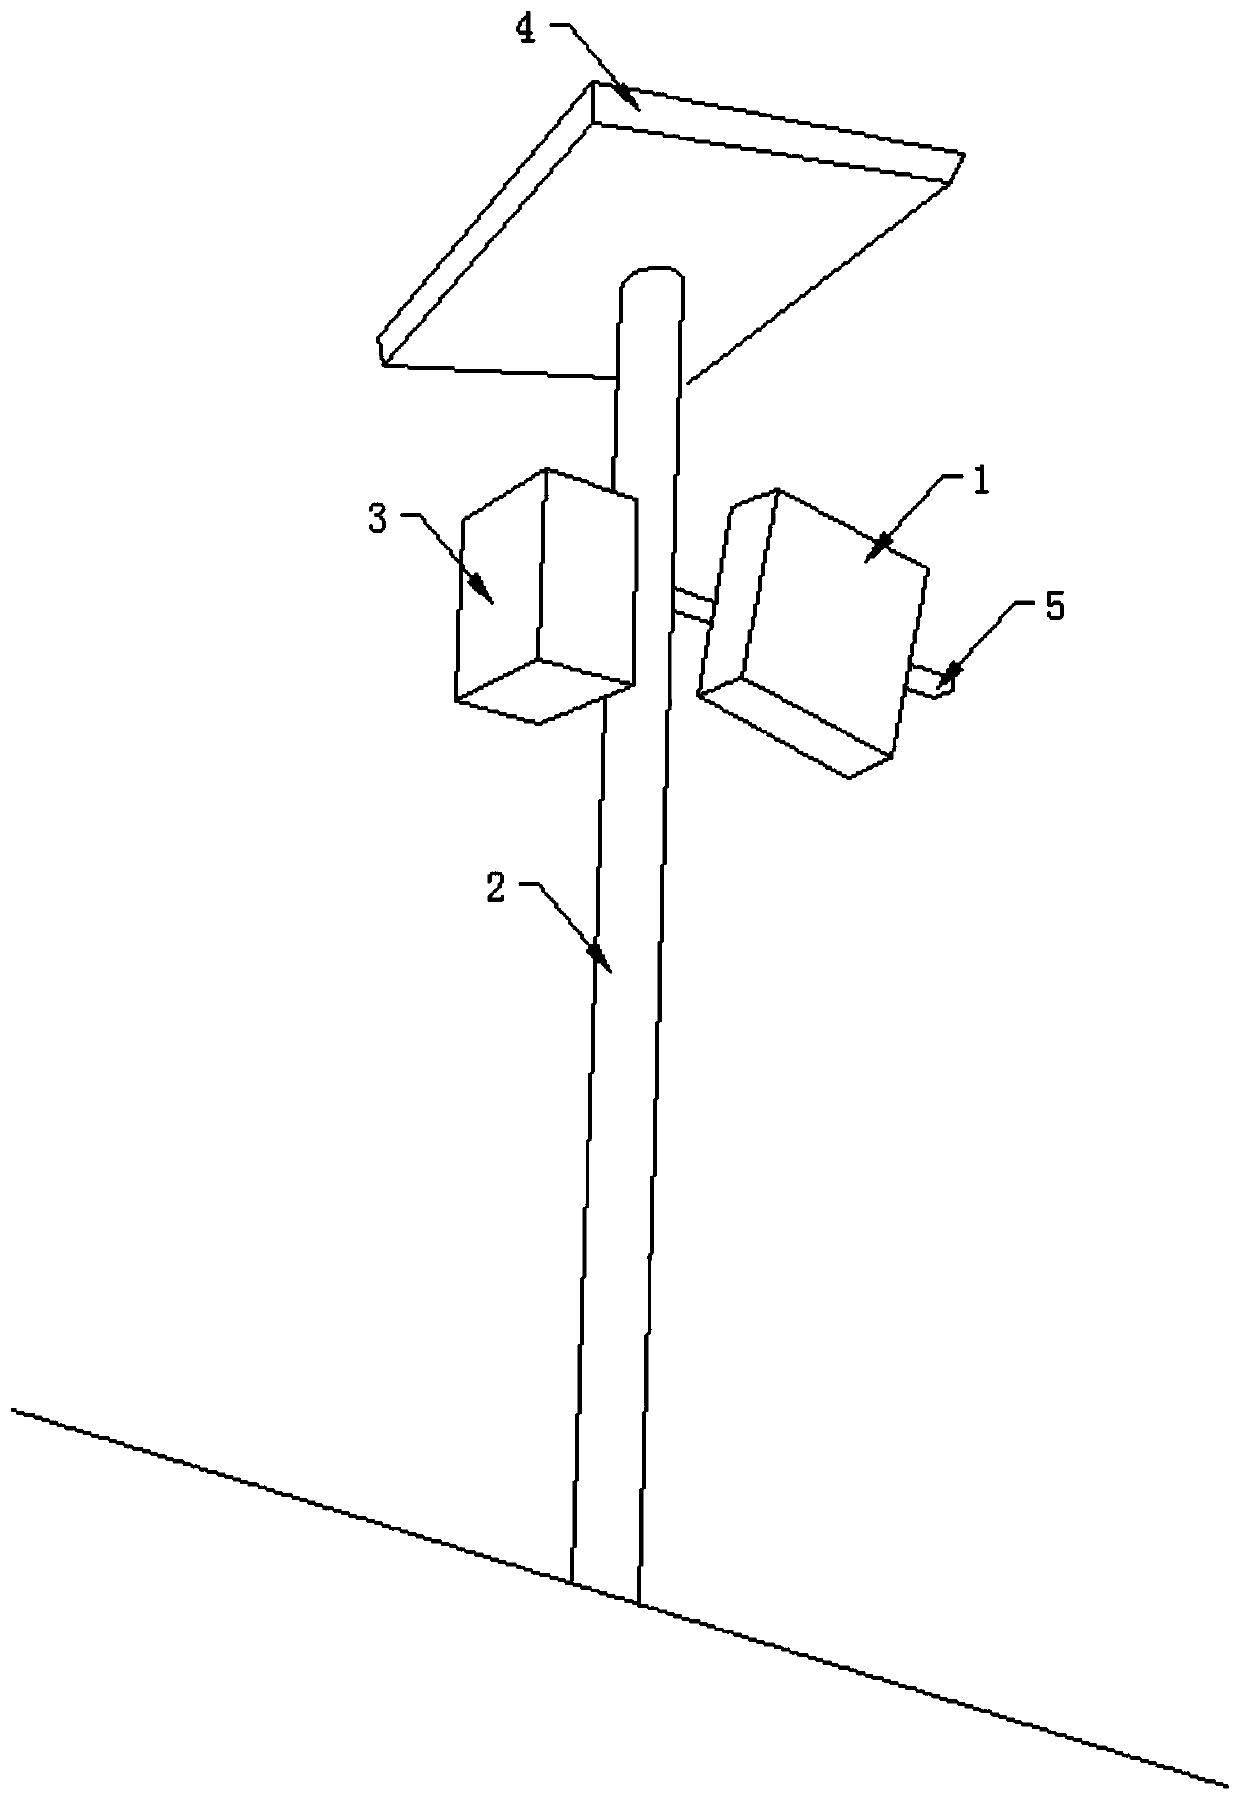 Urban road ponding monitoring device and method